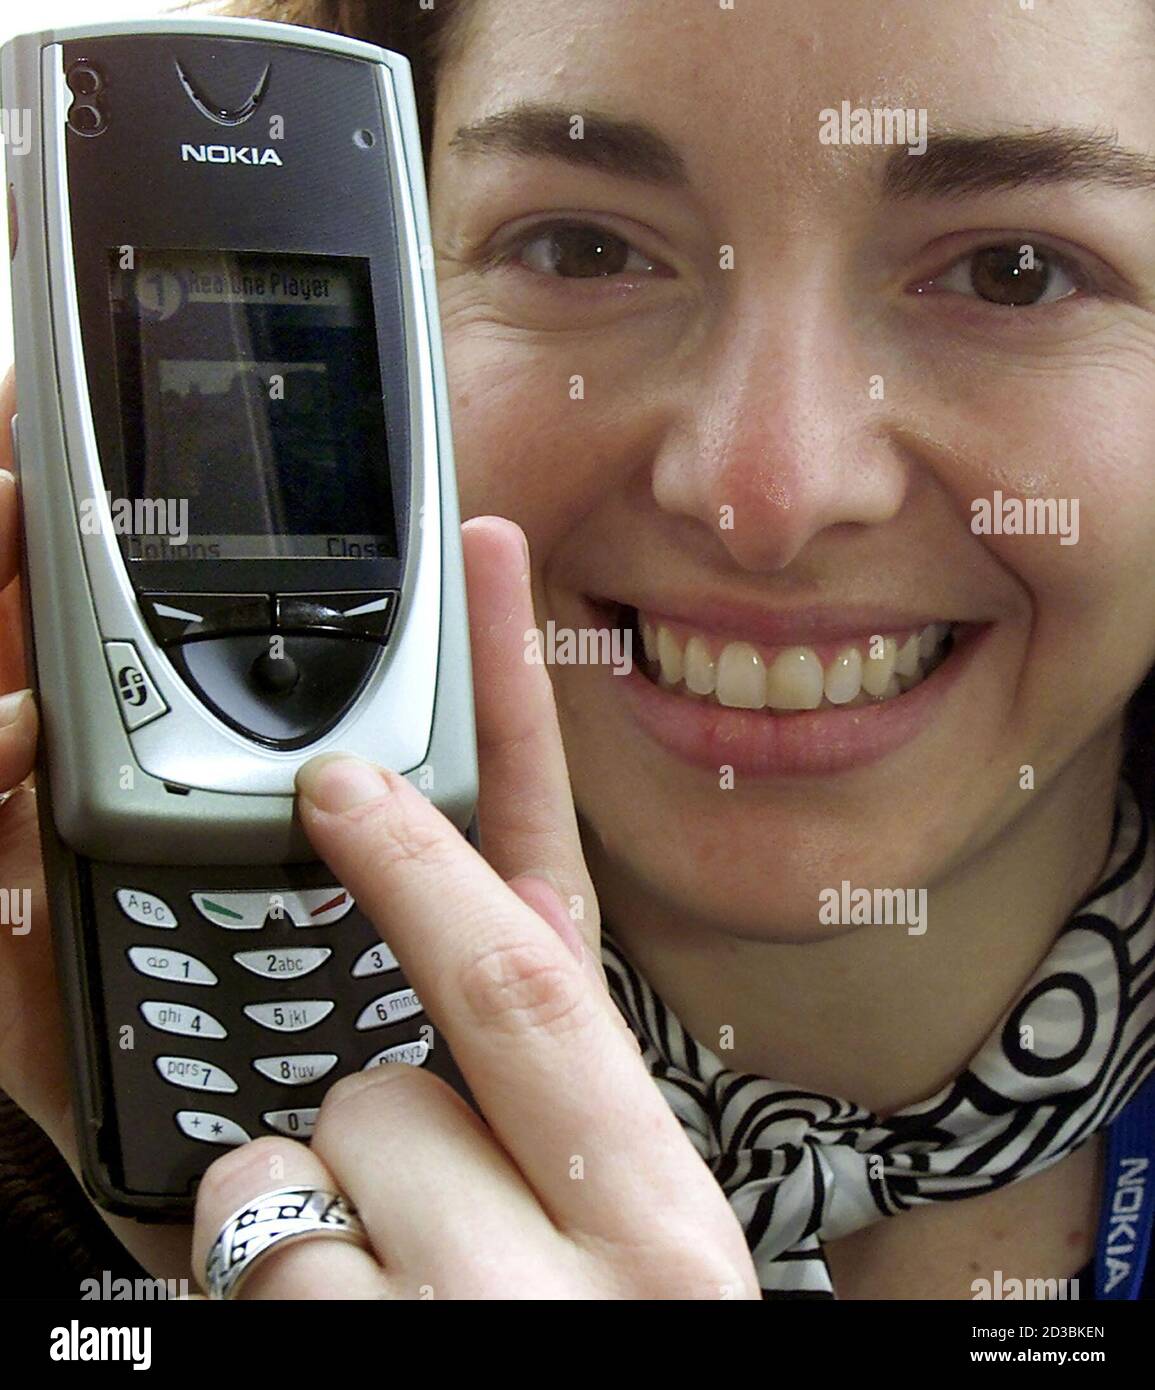 A Model Displays The Latest Nokia 7650 Mobile Phone With An Integrated Camera As World Premier At The Cebit In Hanover March 12 02 About 8 000 Exhibitors Will Present Their Products At